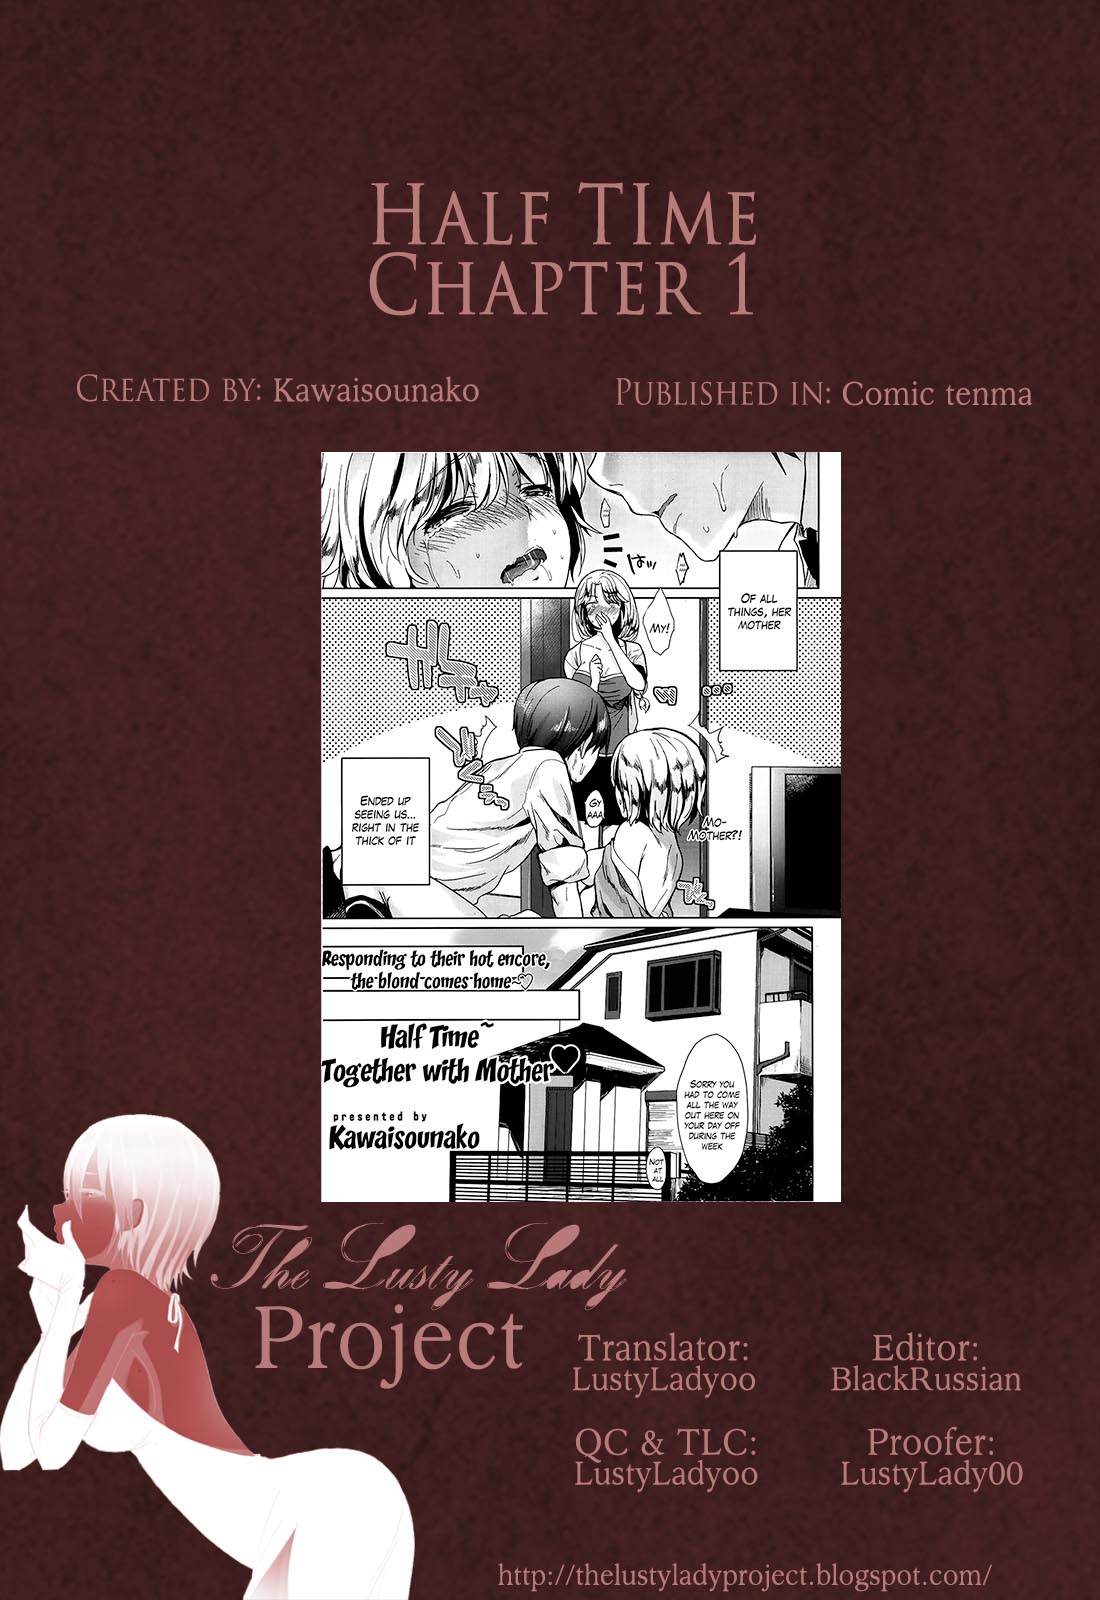 [Kawaisounako] Half Time~ Together with Ch. 1 and 2 (COMIC Tenma 2012) [English] [The Lusty Lady Project] 